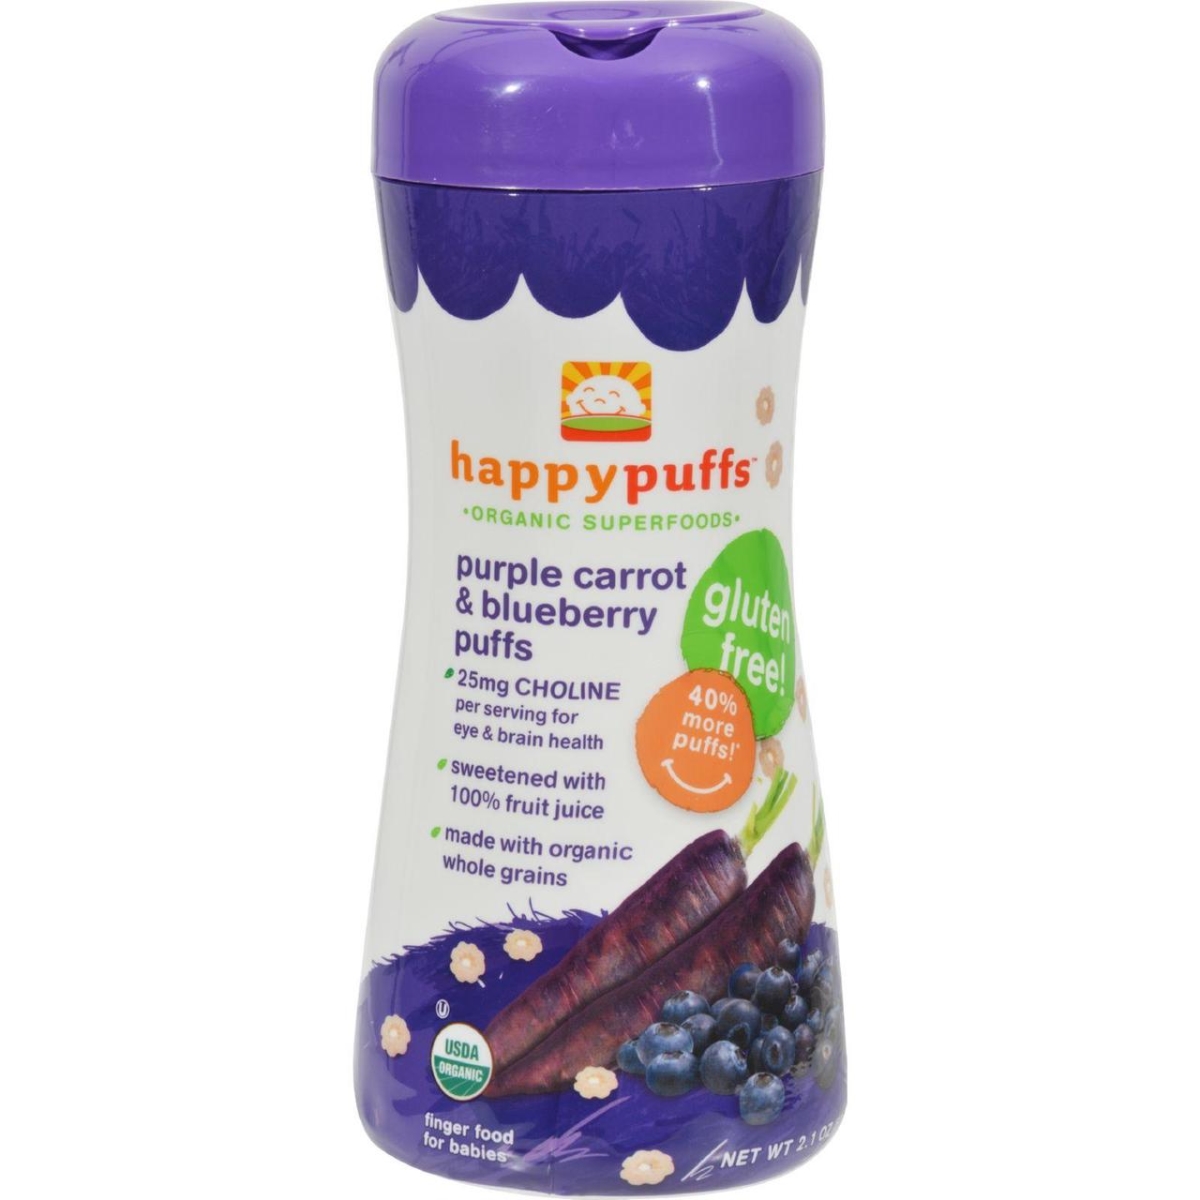 Picture of Happy Baby HG1234905 2.1 oz Happy Bites Puffs - Organic Happypuffs Purple Carrot & Blueberry, Case of 6